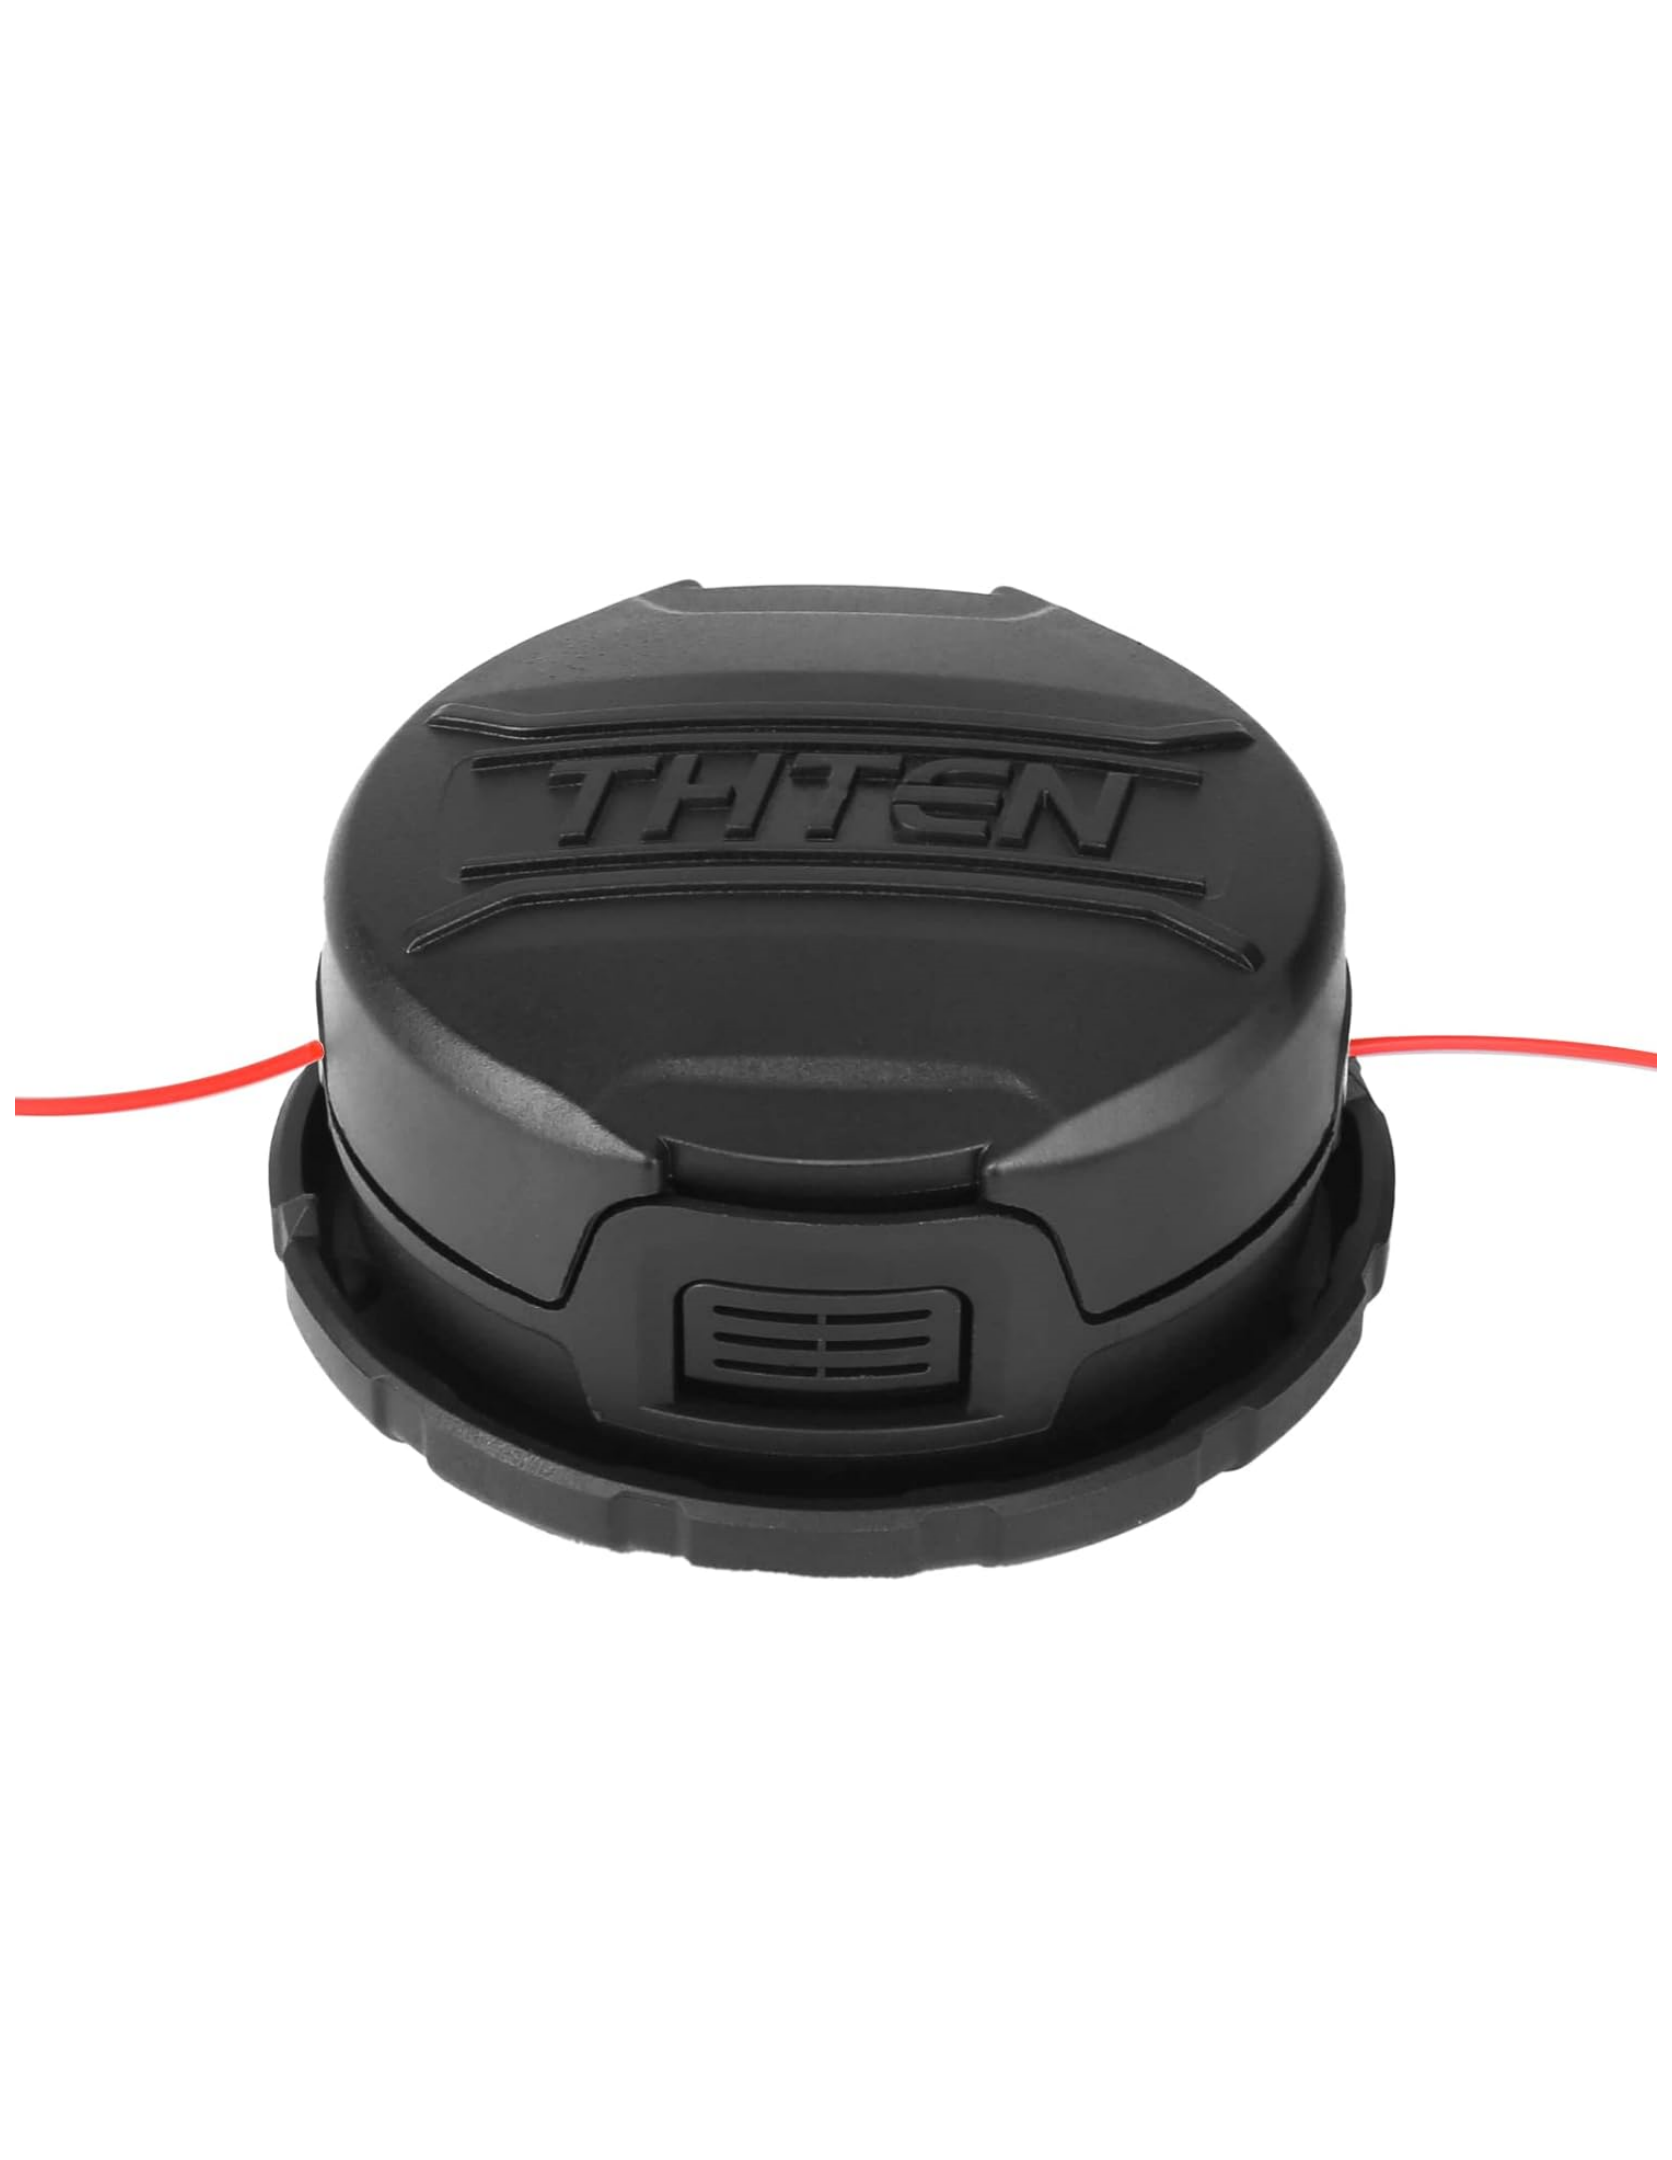 THTEN DWO1DT995 Replacement Head Compatible with Dewalt DCST970,DCST922,DCST990,DCST920,DCST925,DCST991 Cordless String Trimmer with 0.080" 20ft Trimmer Spool Line